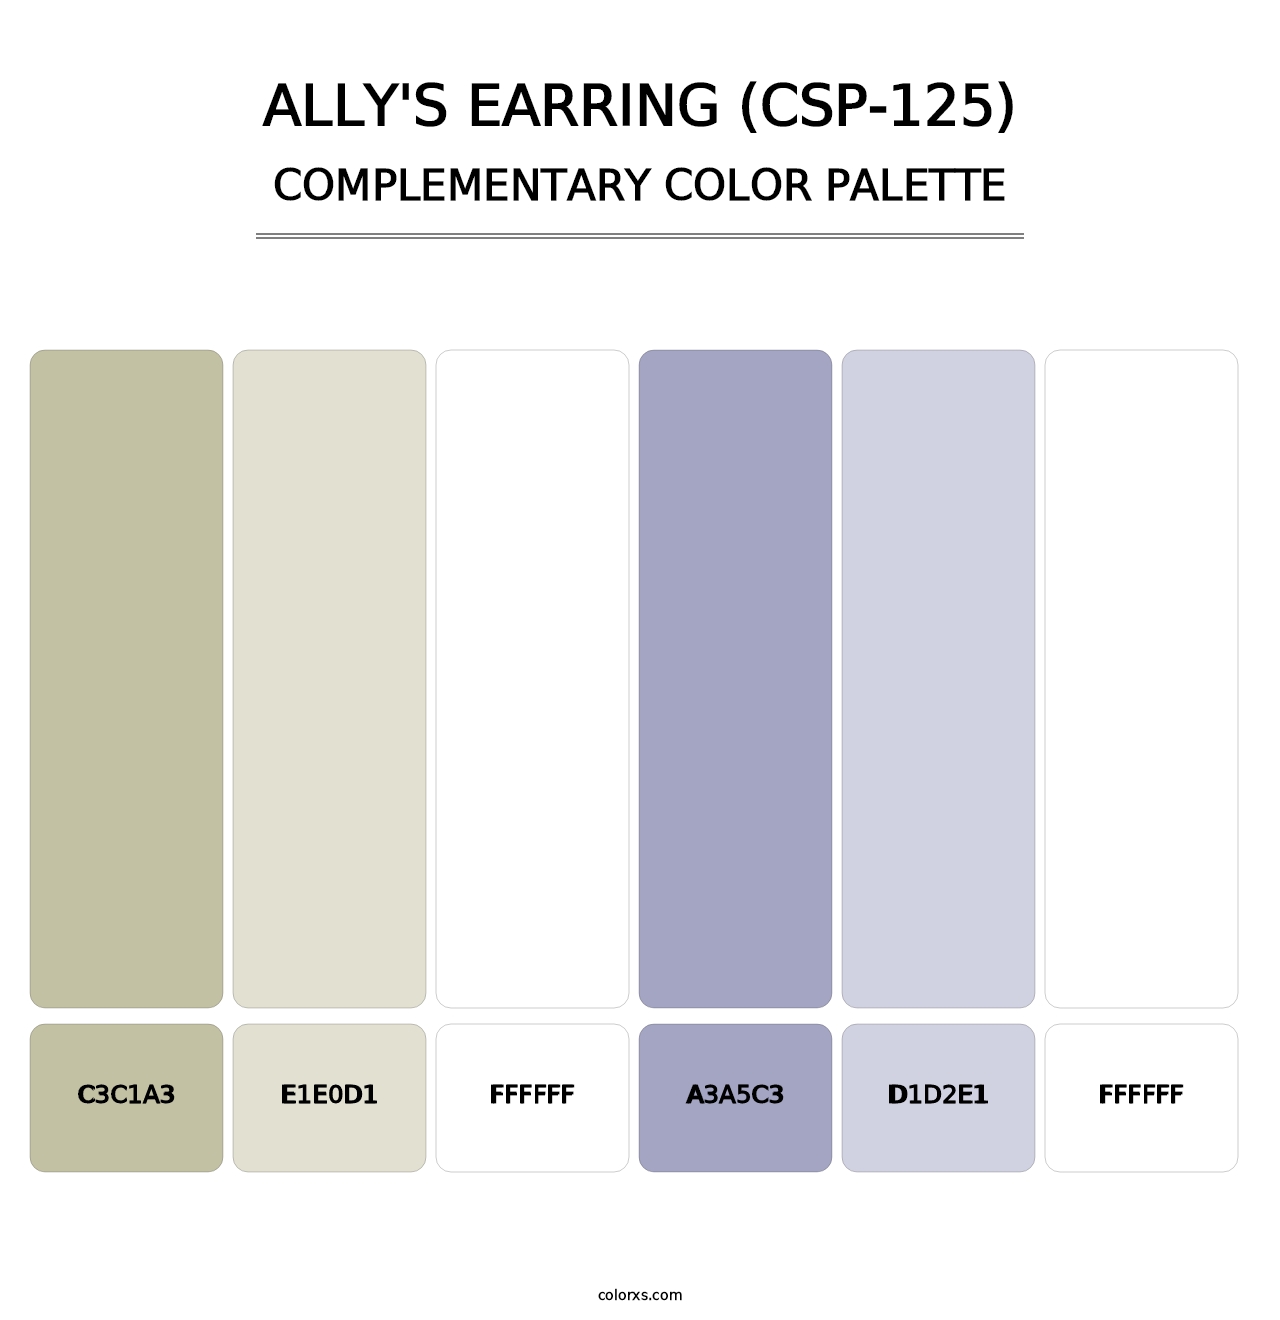 Ally's Earring (CSP-125) - Complementary Color Palette